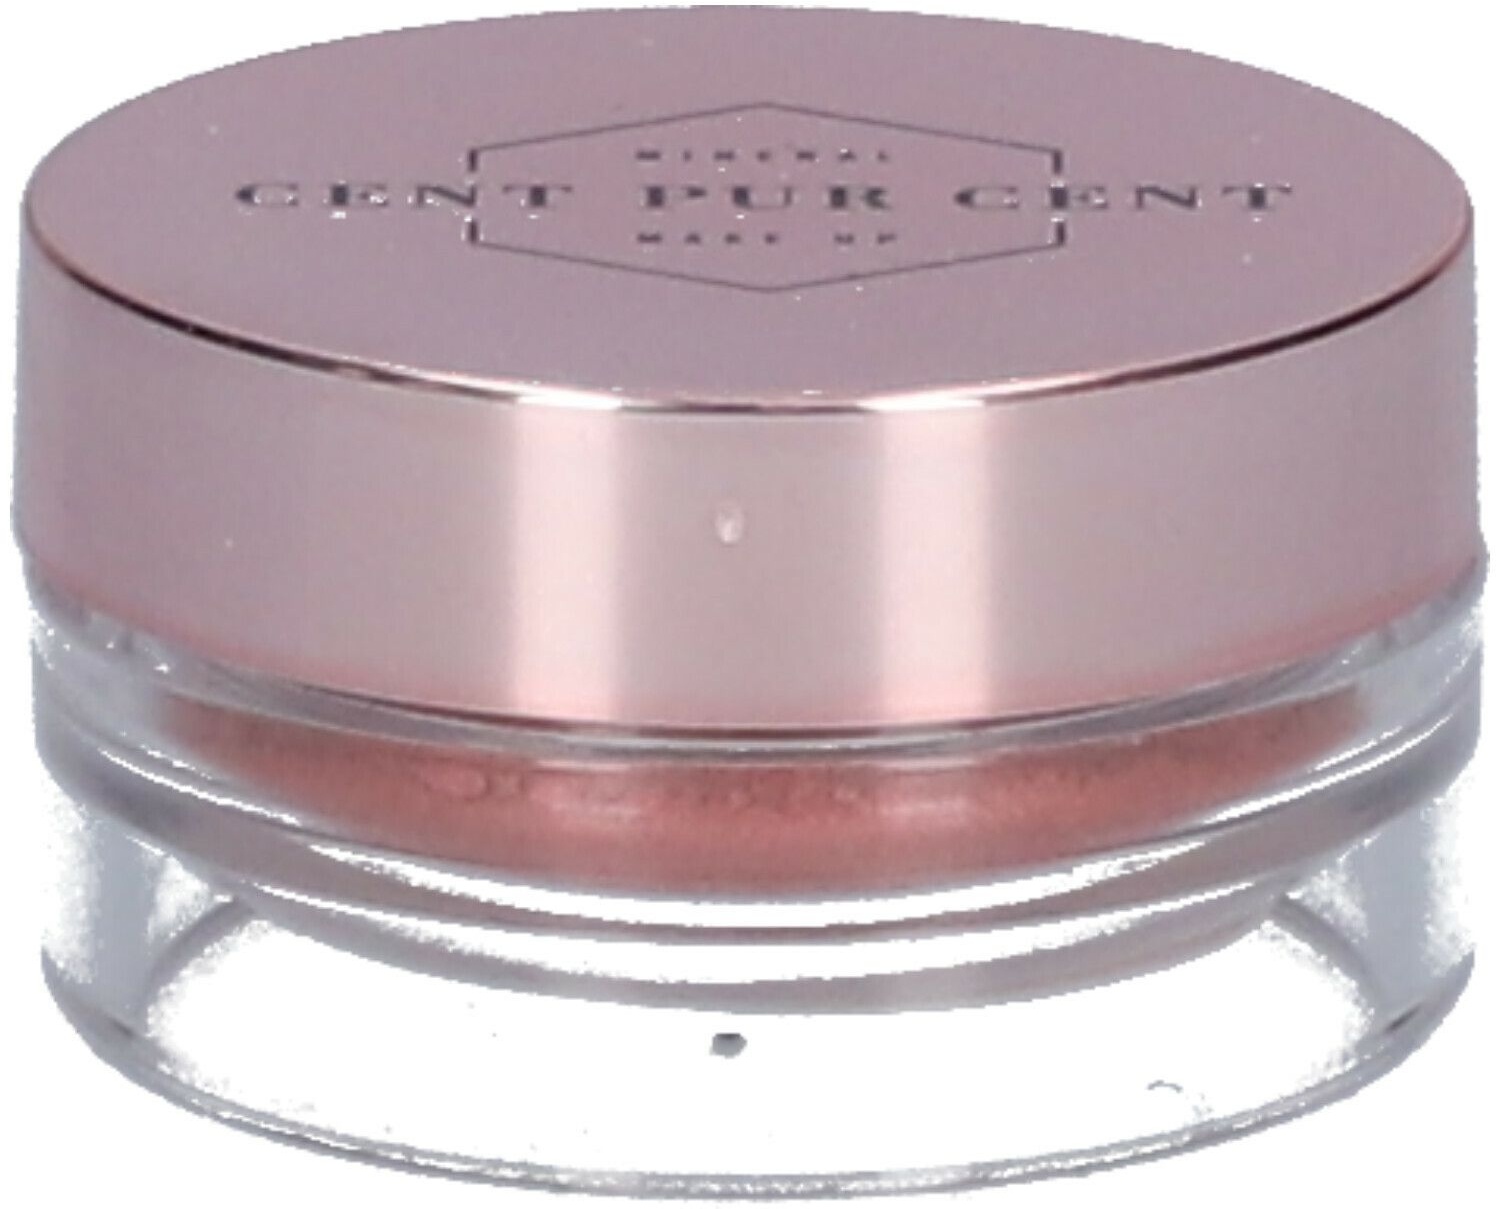 Cent Pur Cent Mineral Eye Shadow Himbeere